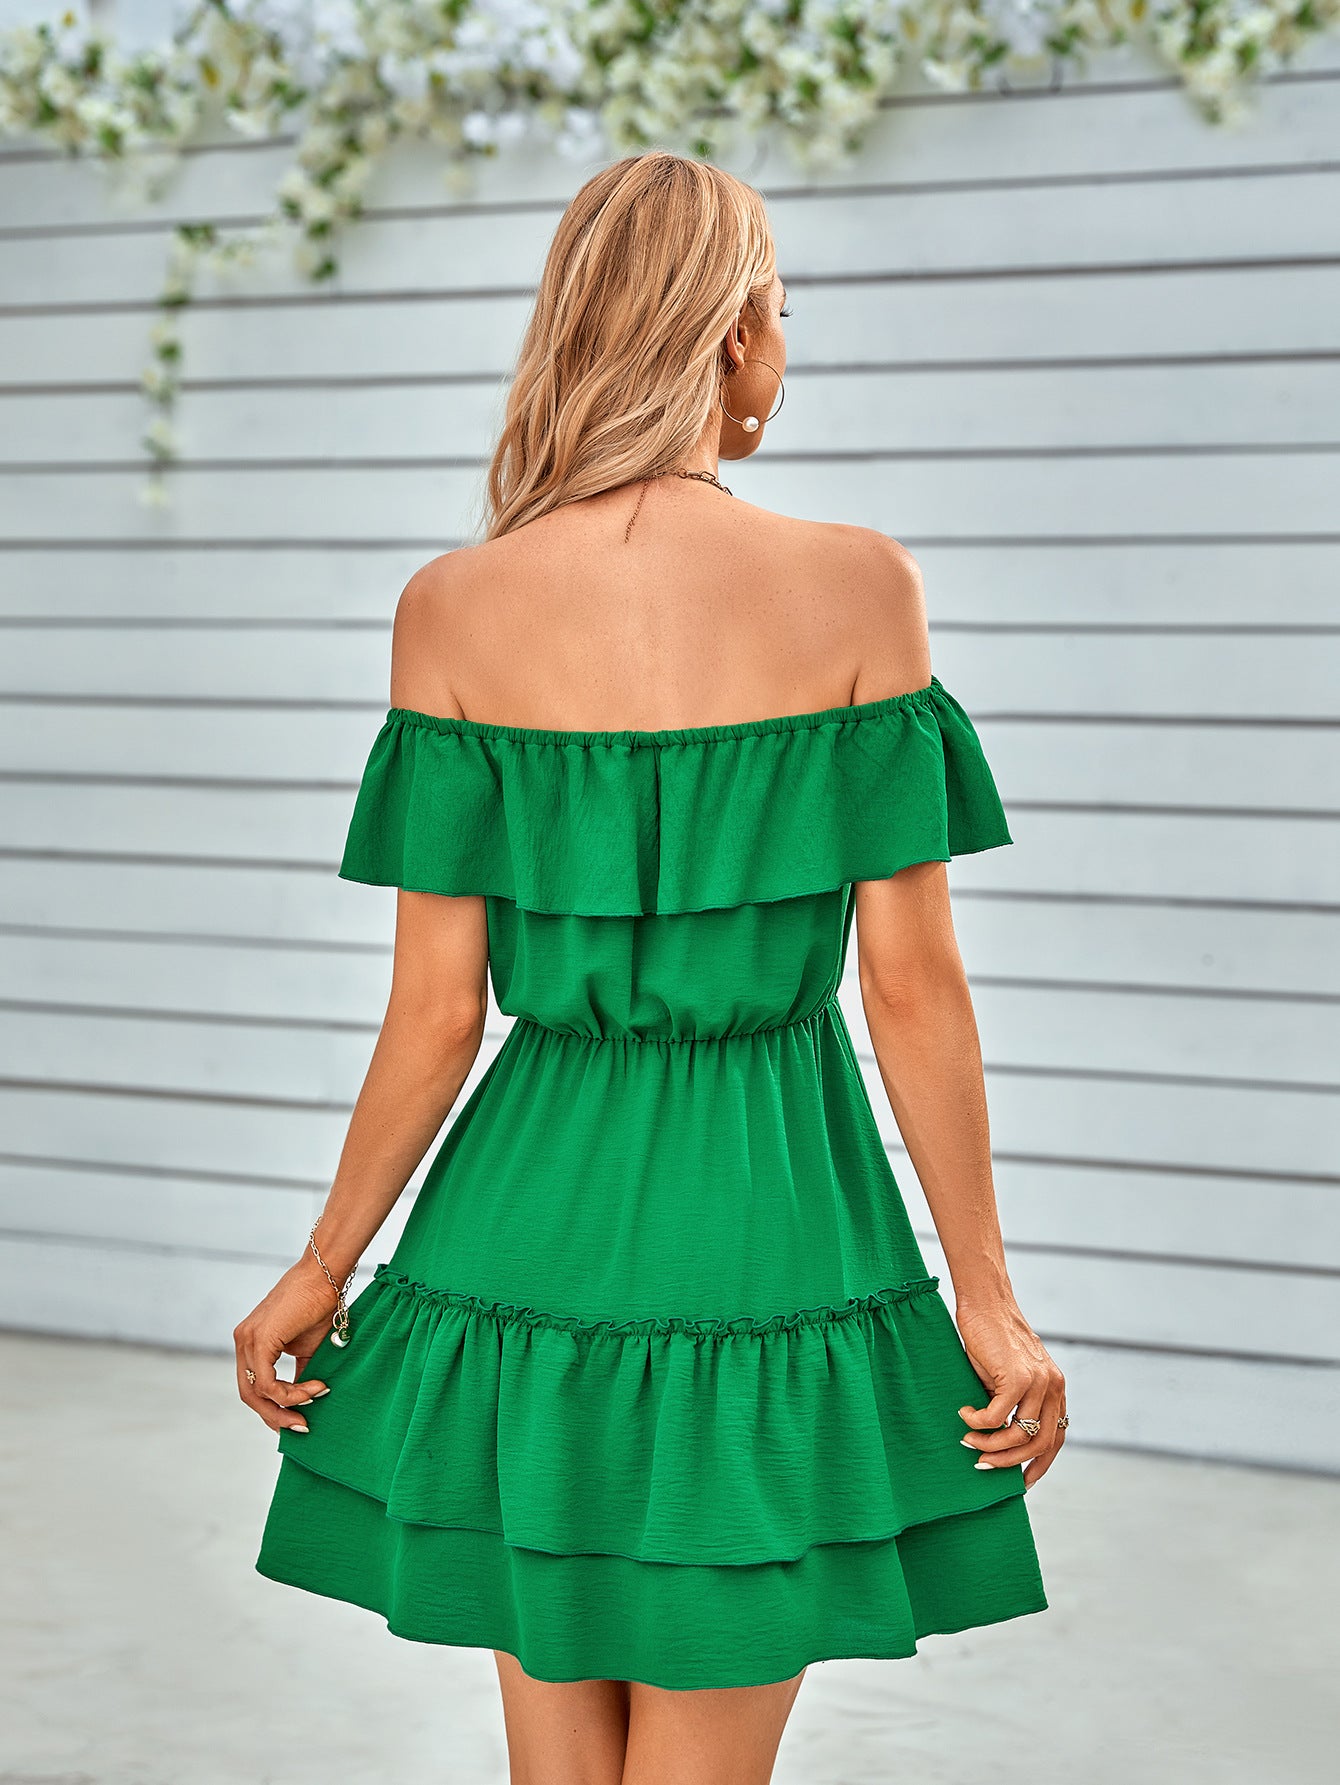 Ruffled Off-Shoulder Tied Dress  Sunset and Swim   